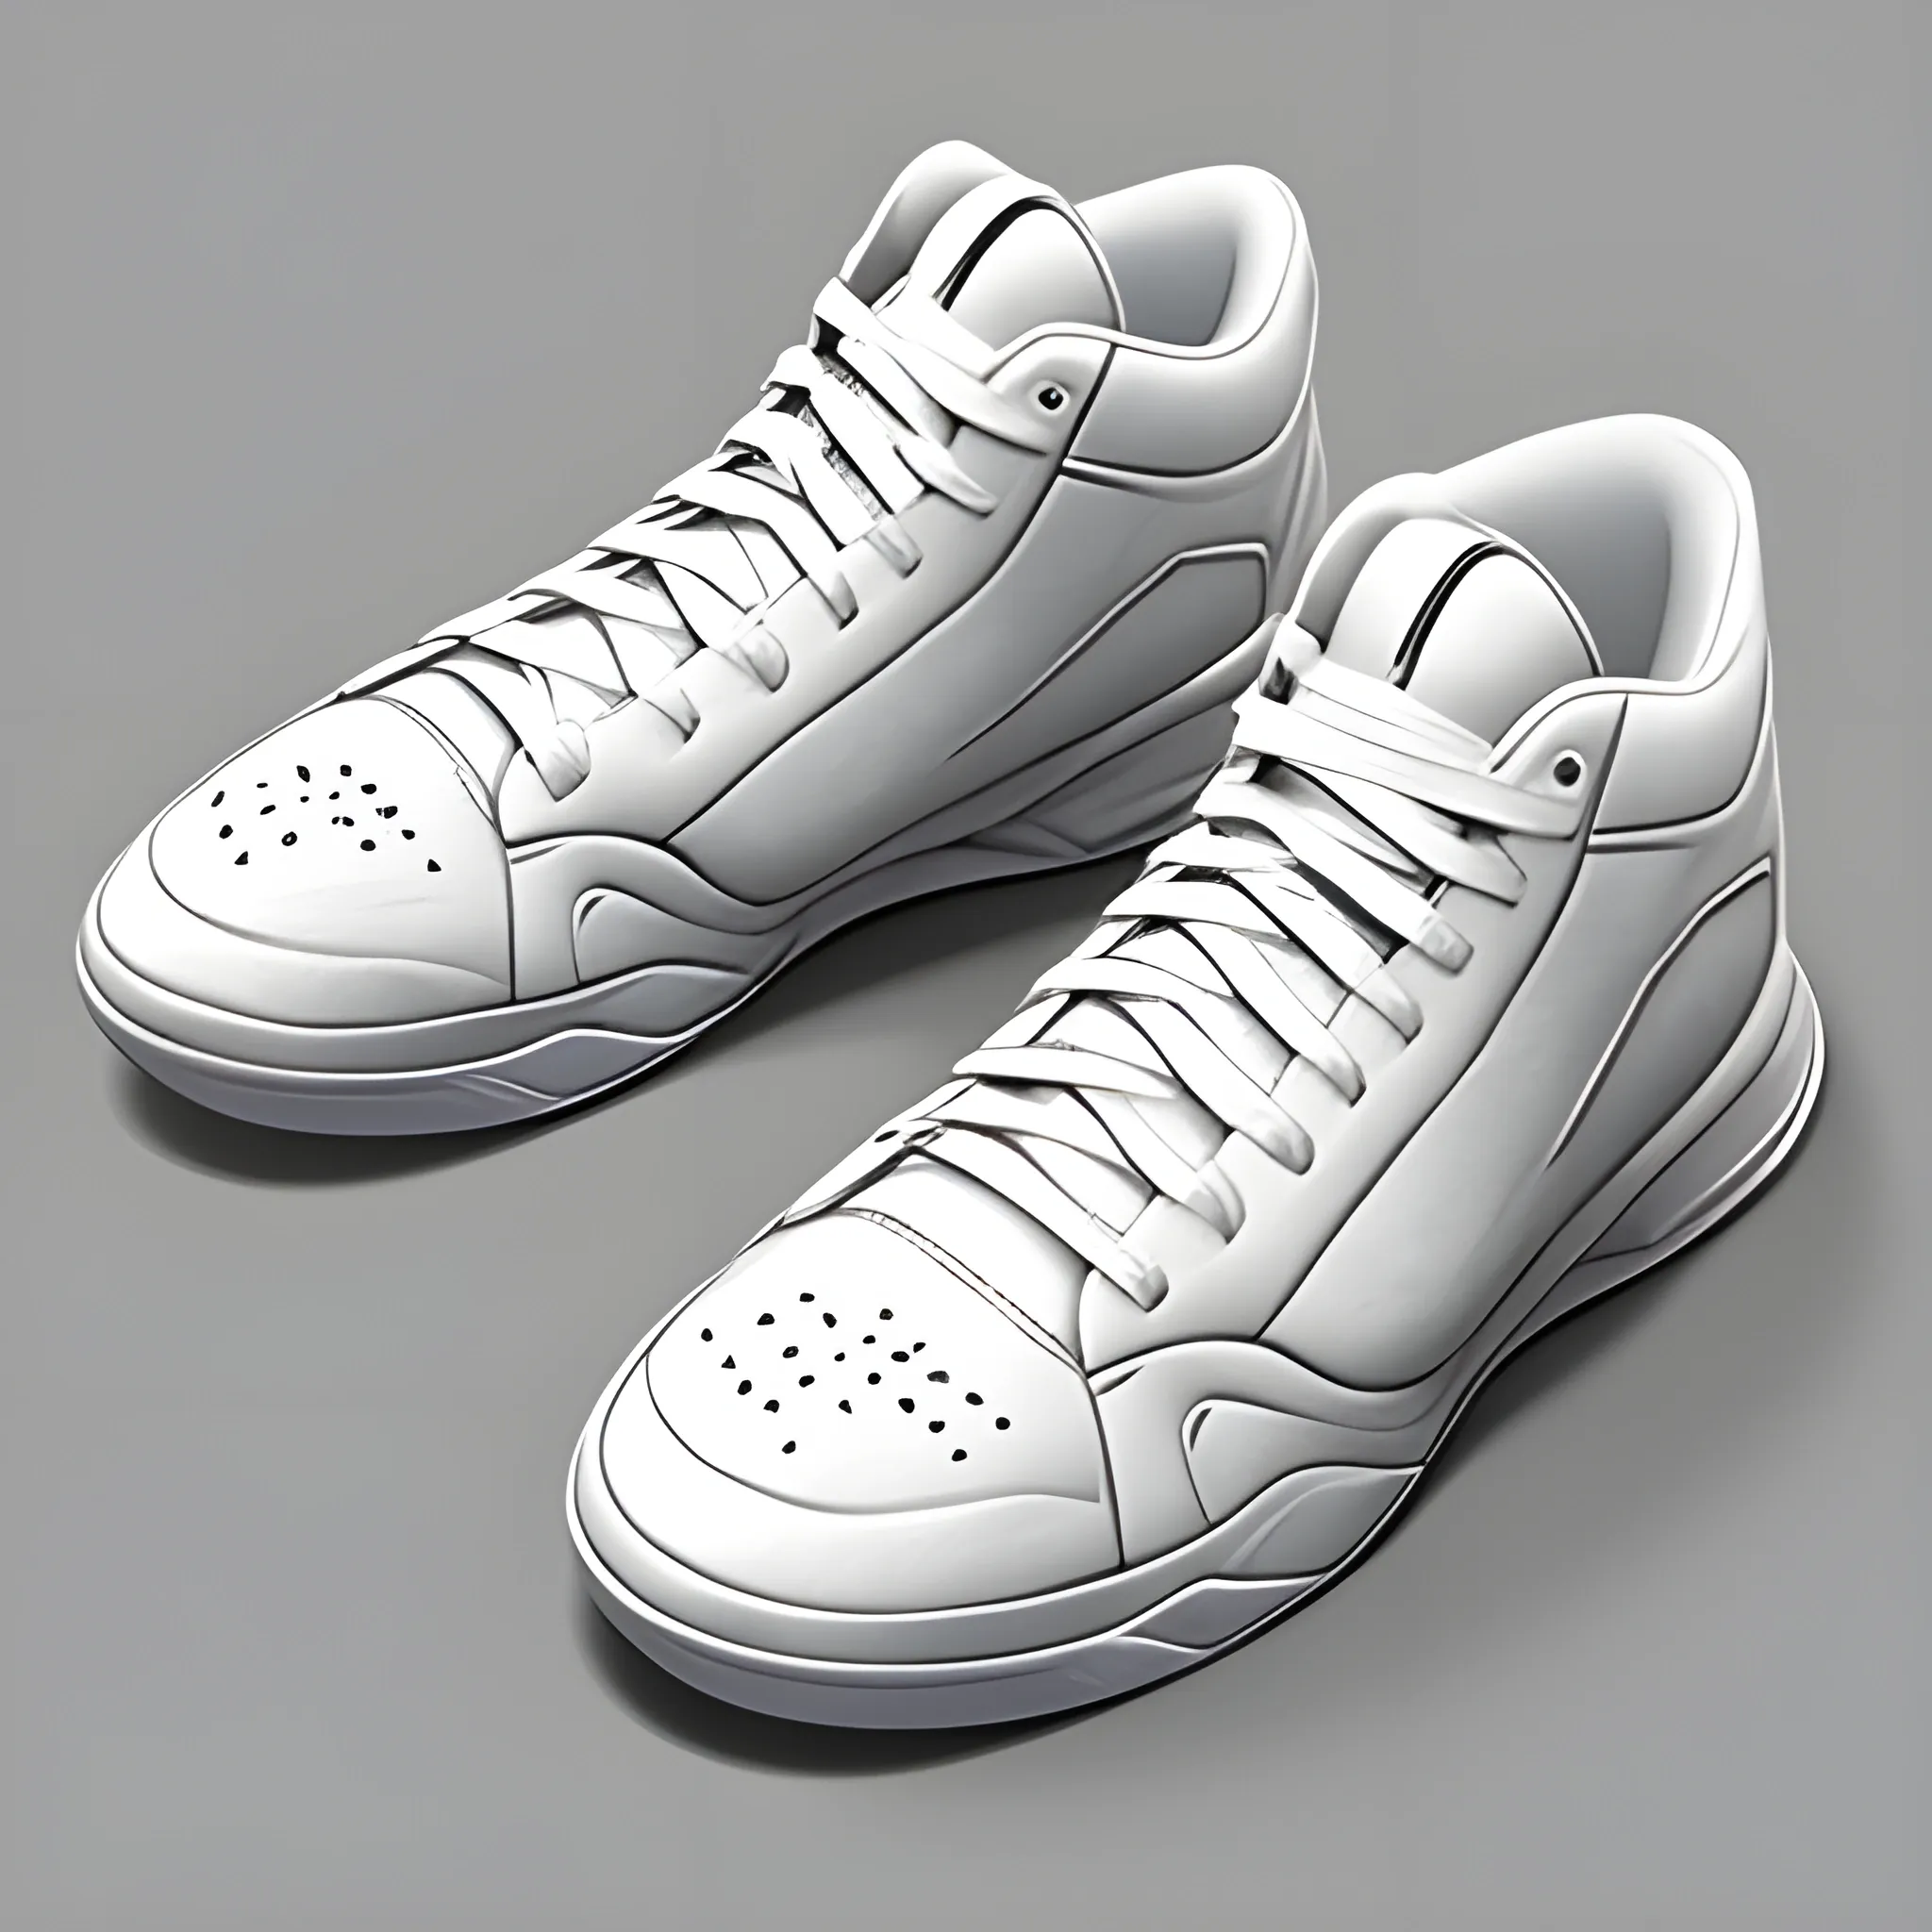 Concept Moon Knight basketball sneakers, popular in art station, soft feeling, bloated, original, pure white, smooth, sharp focus
